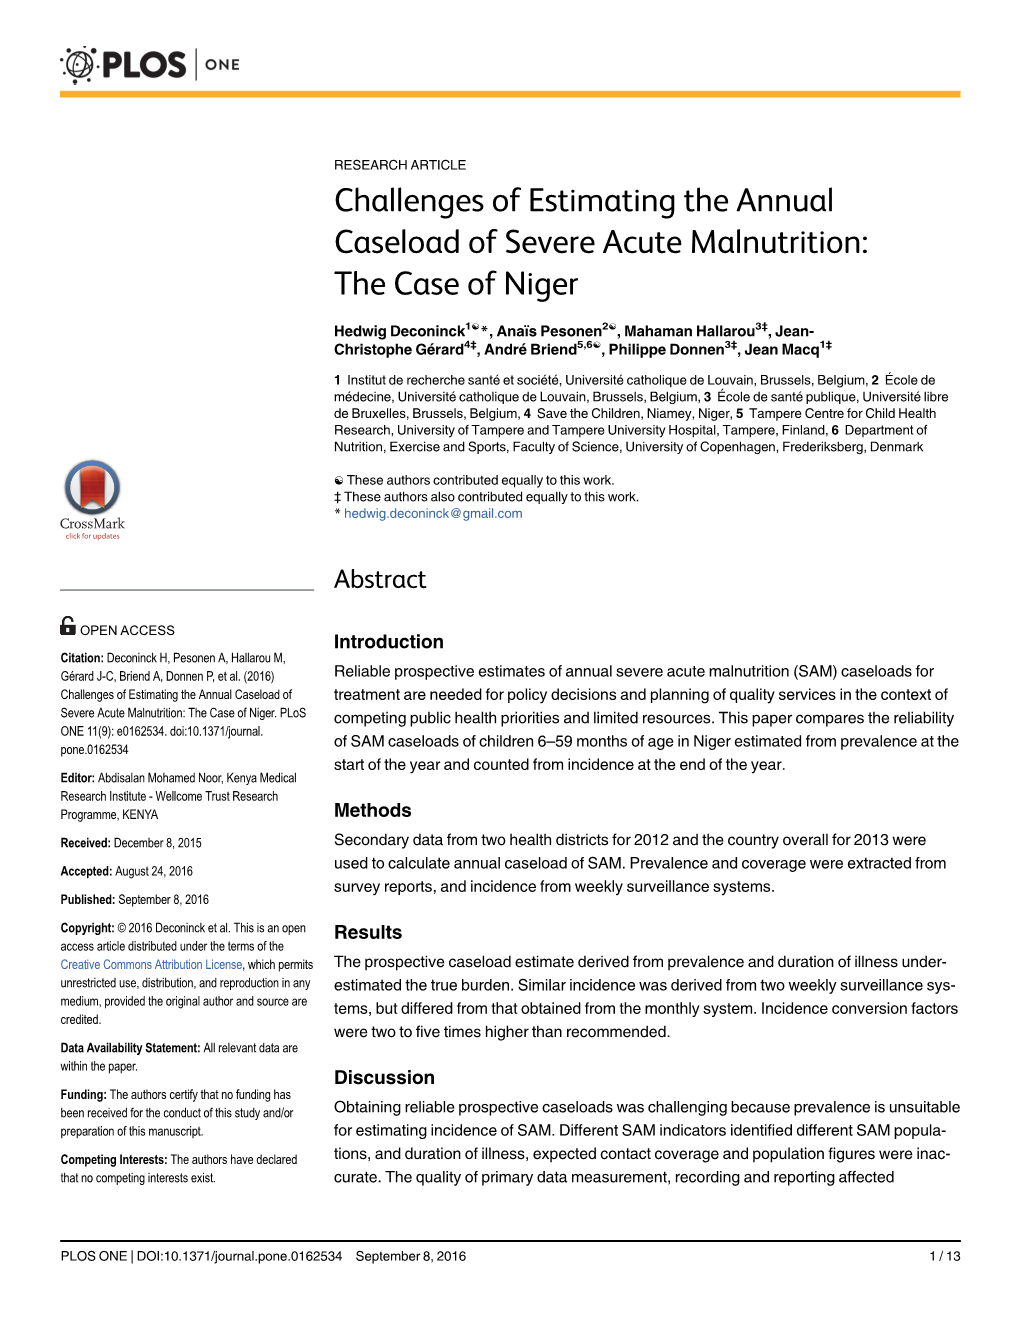 Challenges of Estimating the Annual Caseload of Severe Acute Malnutrition: the Case of Niger